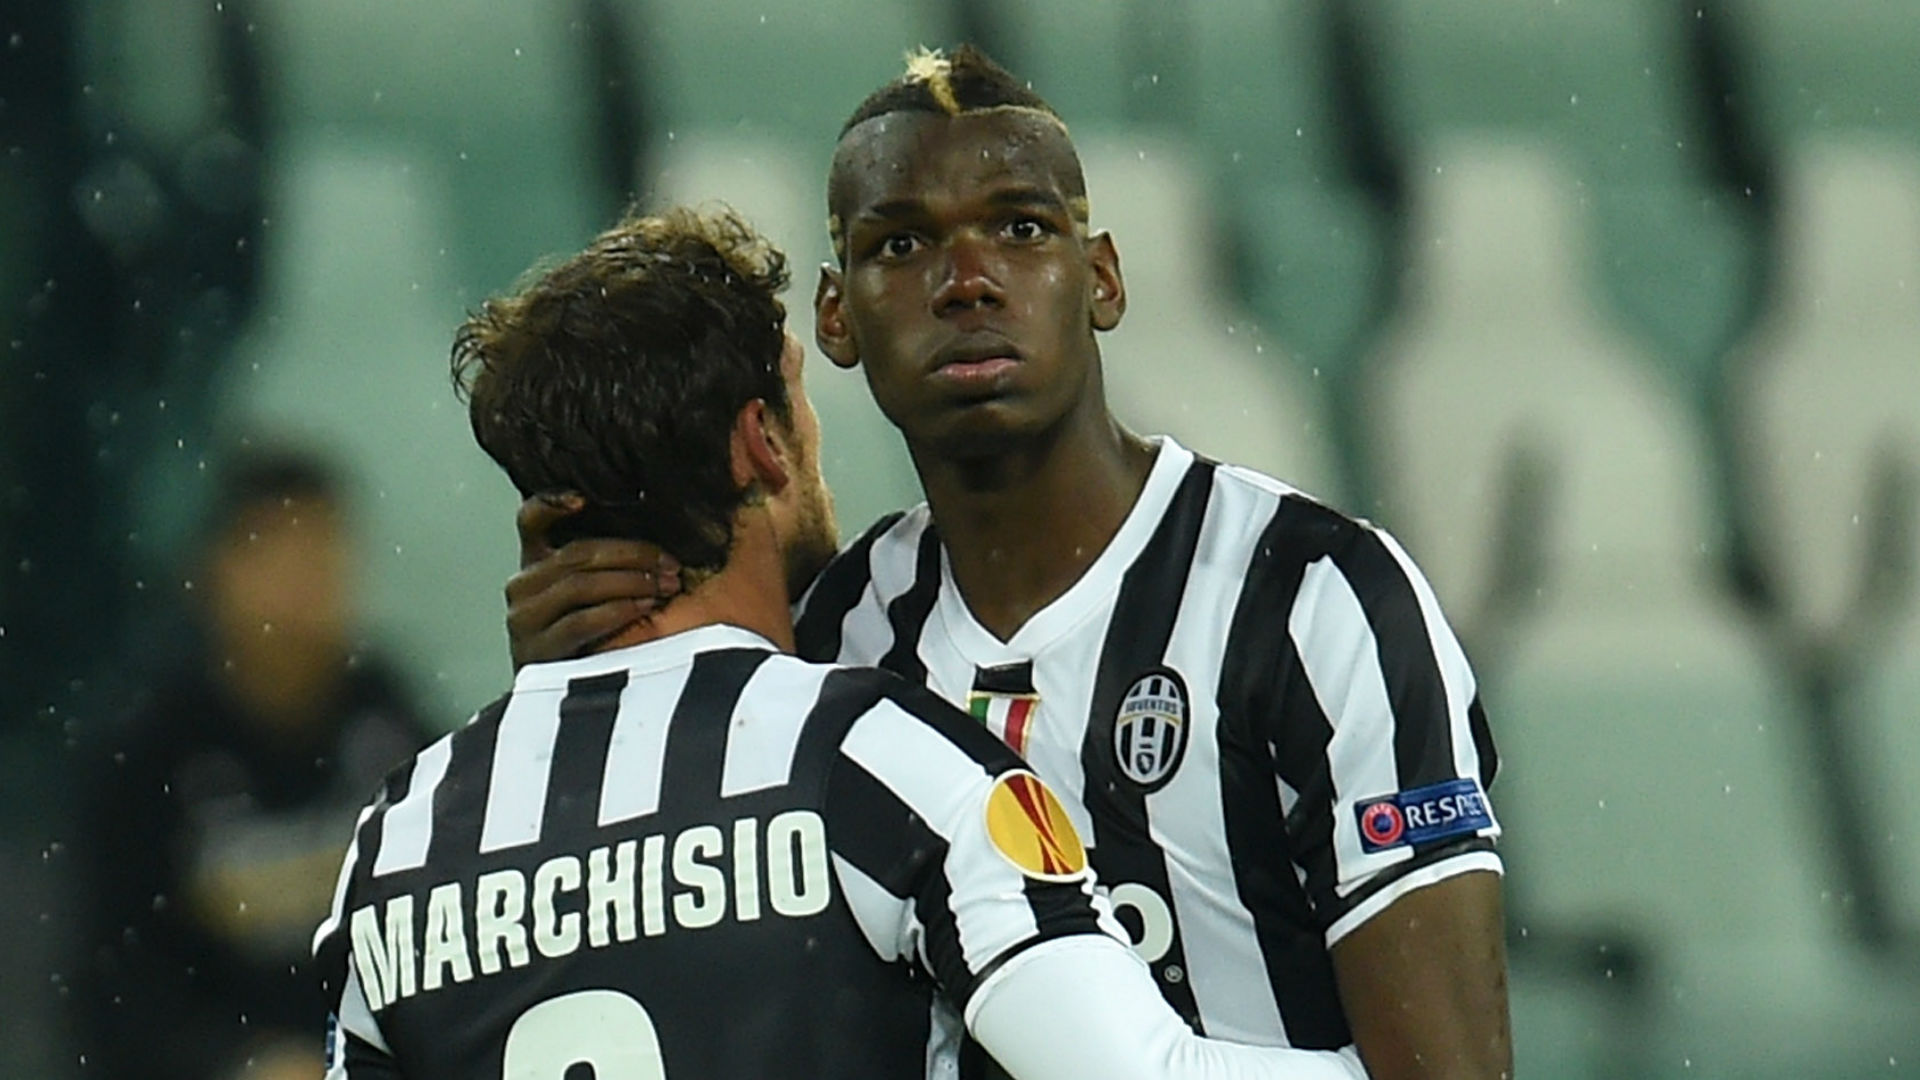 ‘I told Pogba he was wrong to return to Man Utd’ – Marchisio wants World Cup winner back at Juventus